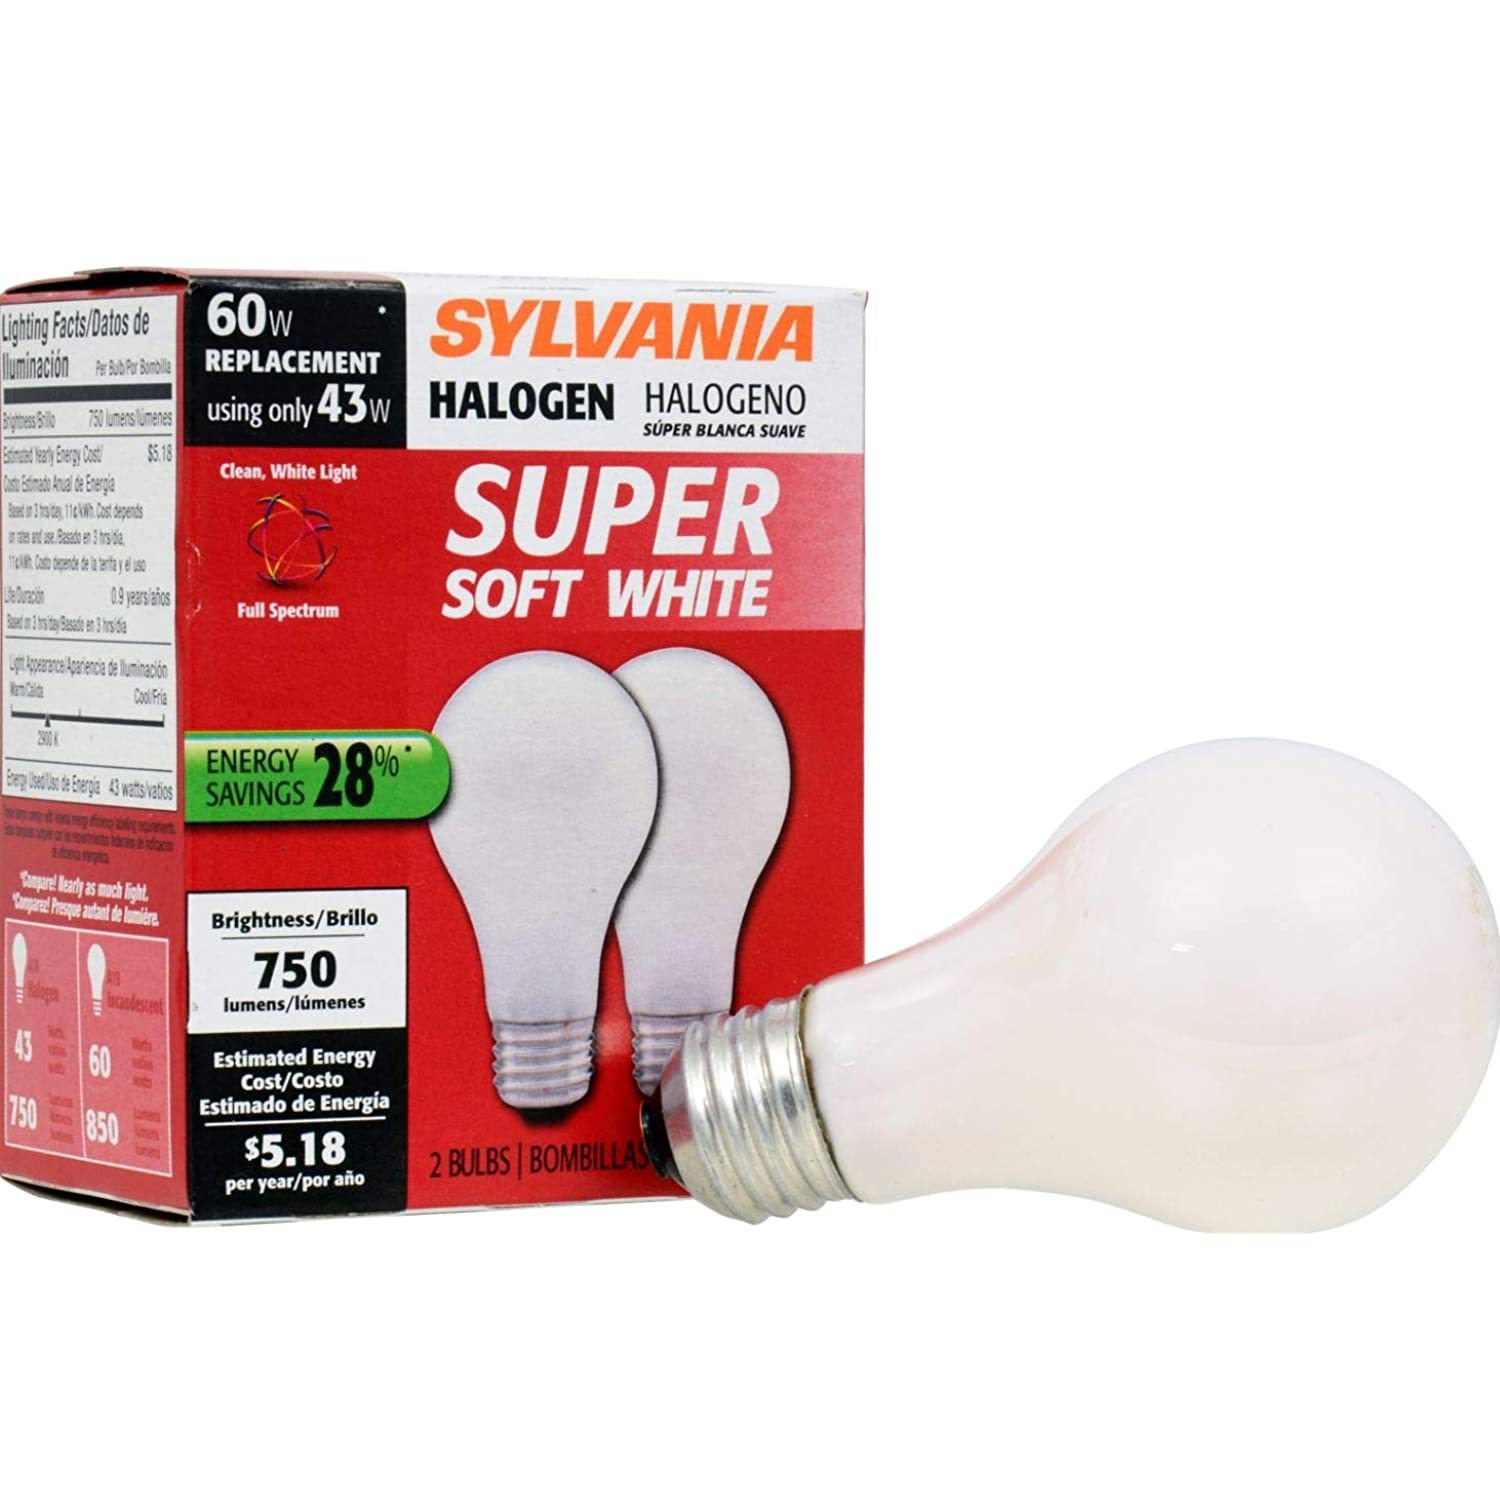 SYLVANIA Halogen Dimmable Lamp / Replacing A19 60W Halogen Bulb Super Soft White